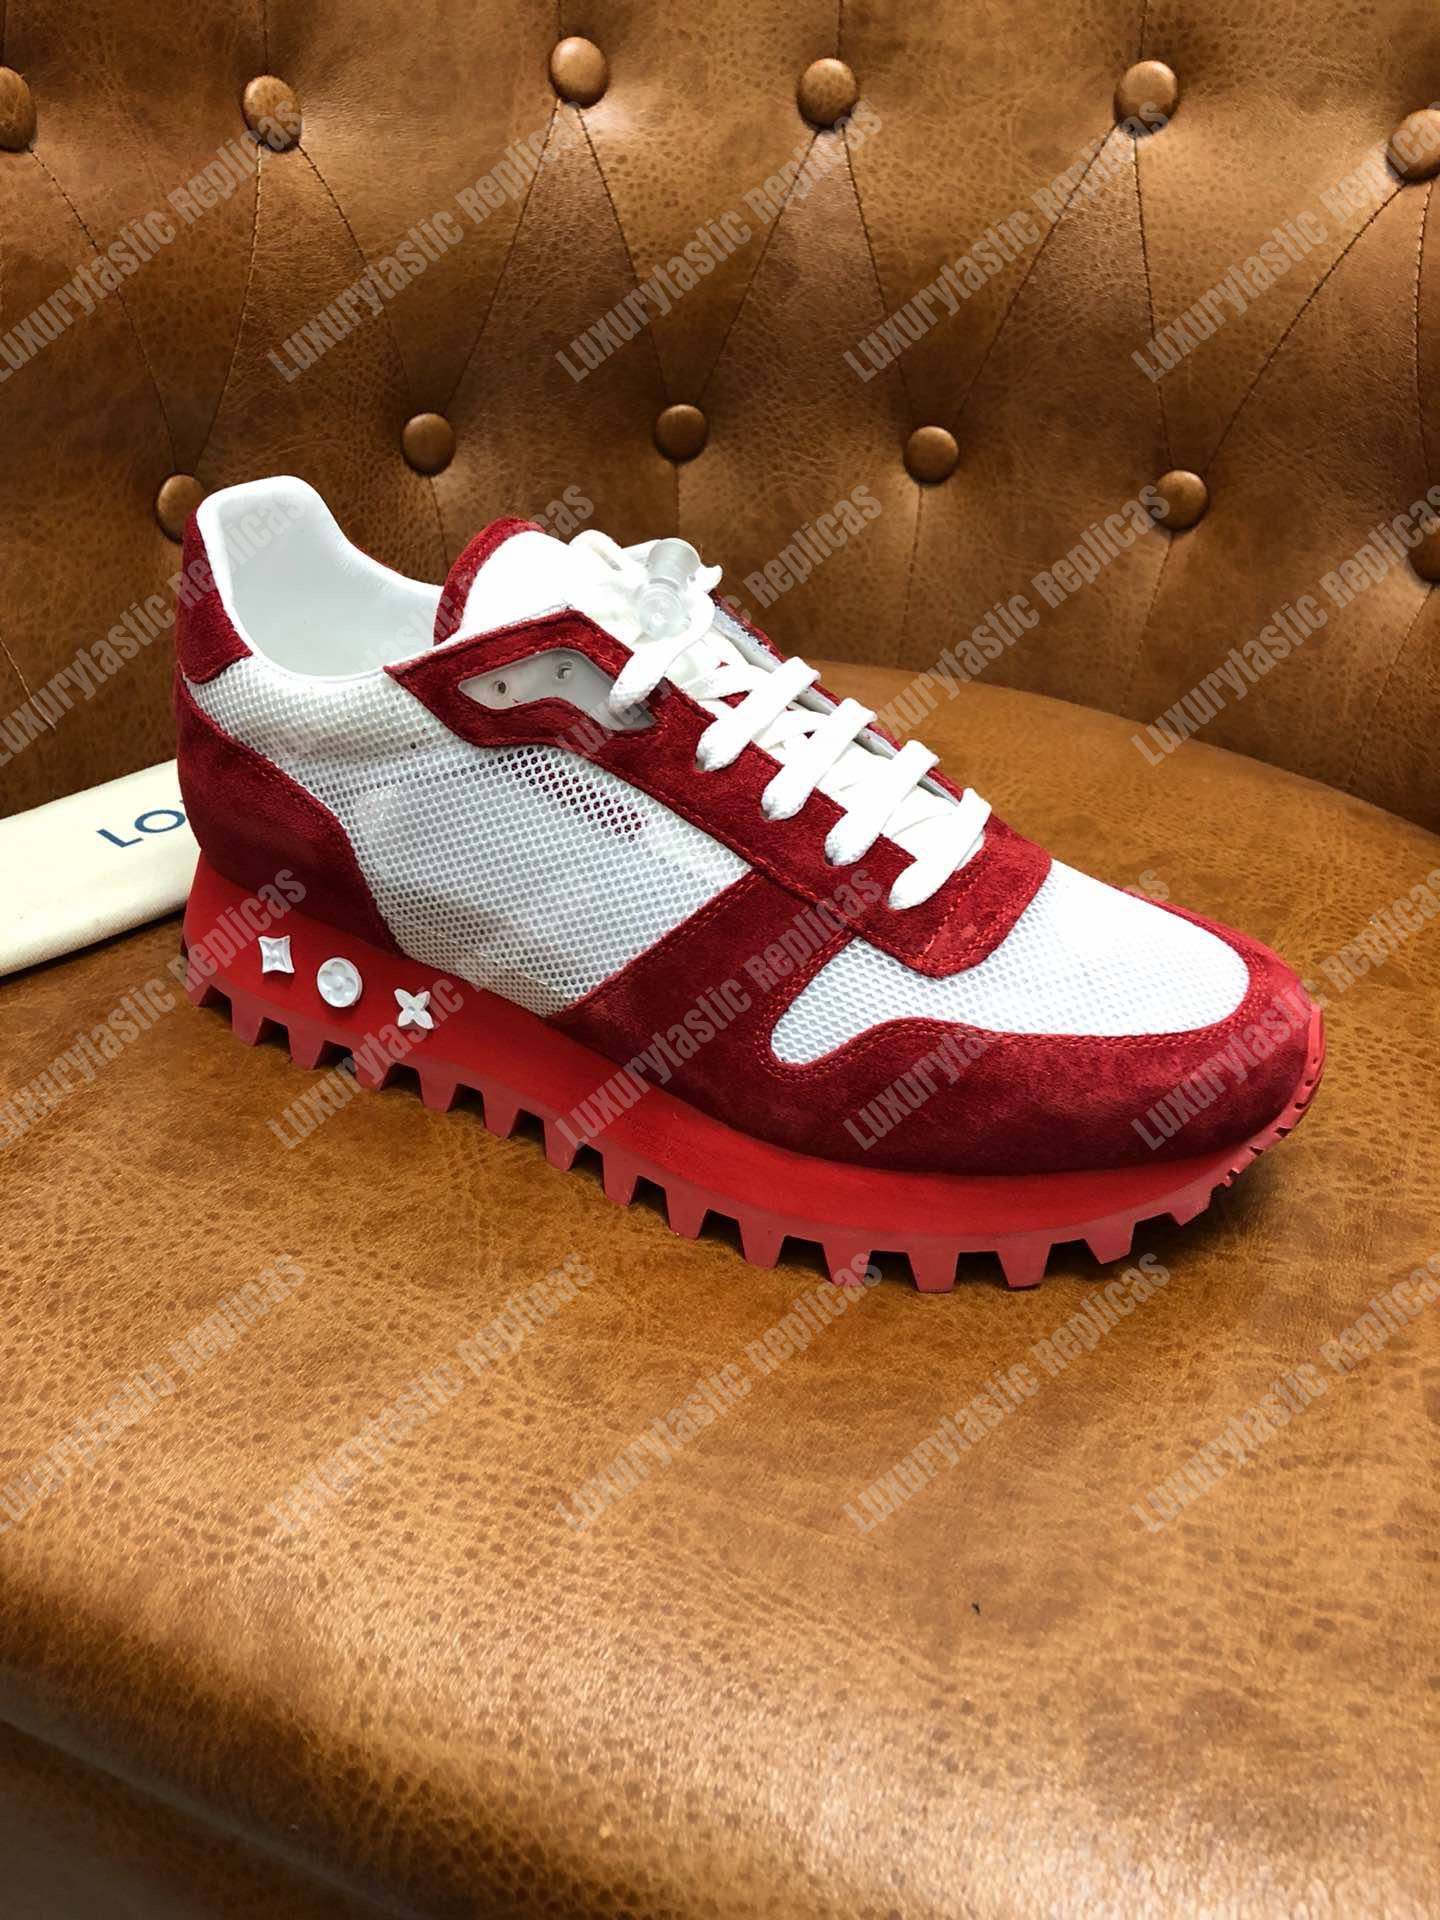 Louis Vuitton 2019 LV Runner Sneakers - Red Sneakers, Shoes - LOU227158